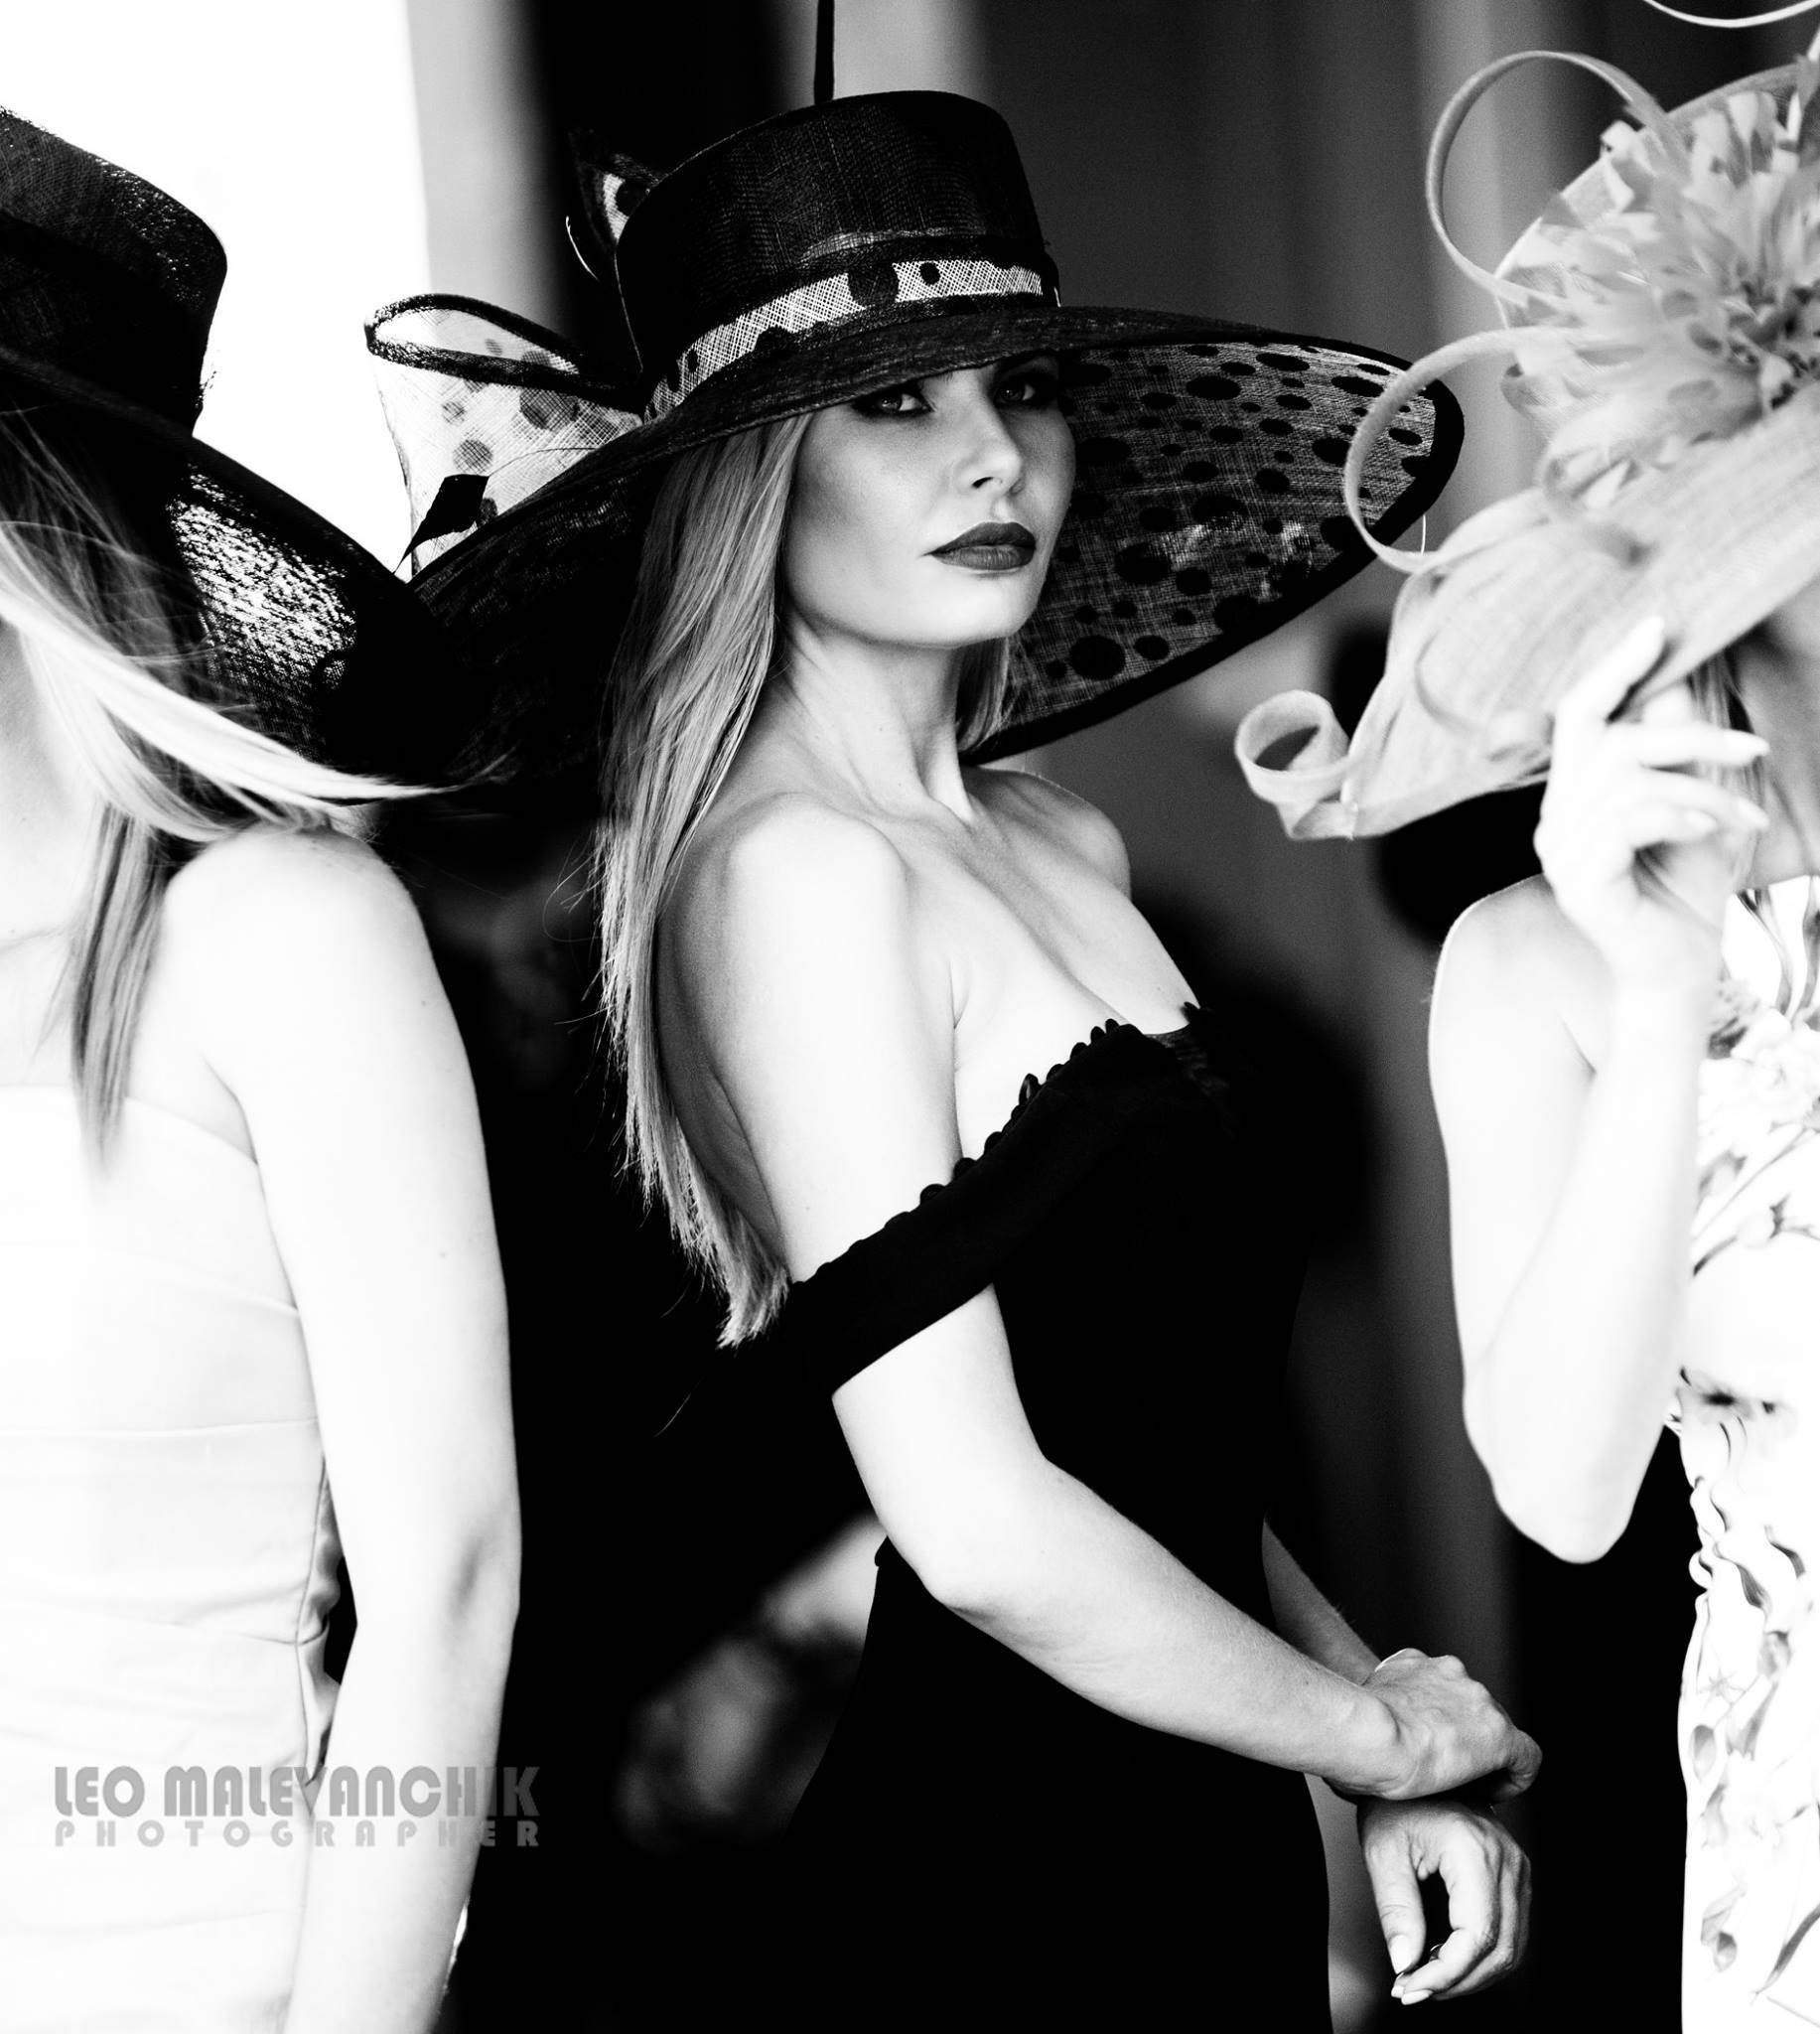 Black and white hat. Kentucky Derby hat.  Royal Ascot hat, Dubai races. Open day at the races hat. Wedding hat. Couture hat. Designer hat